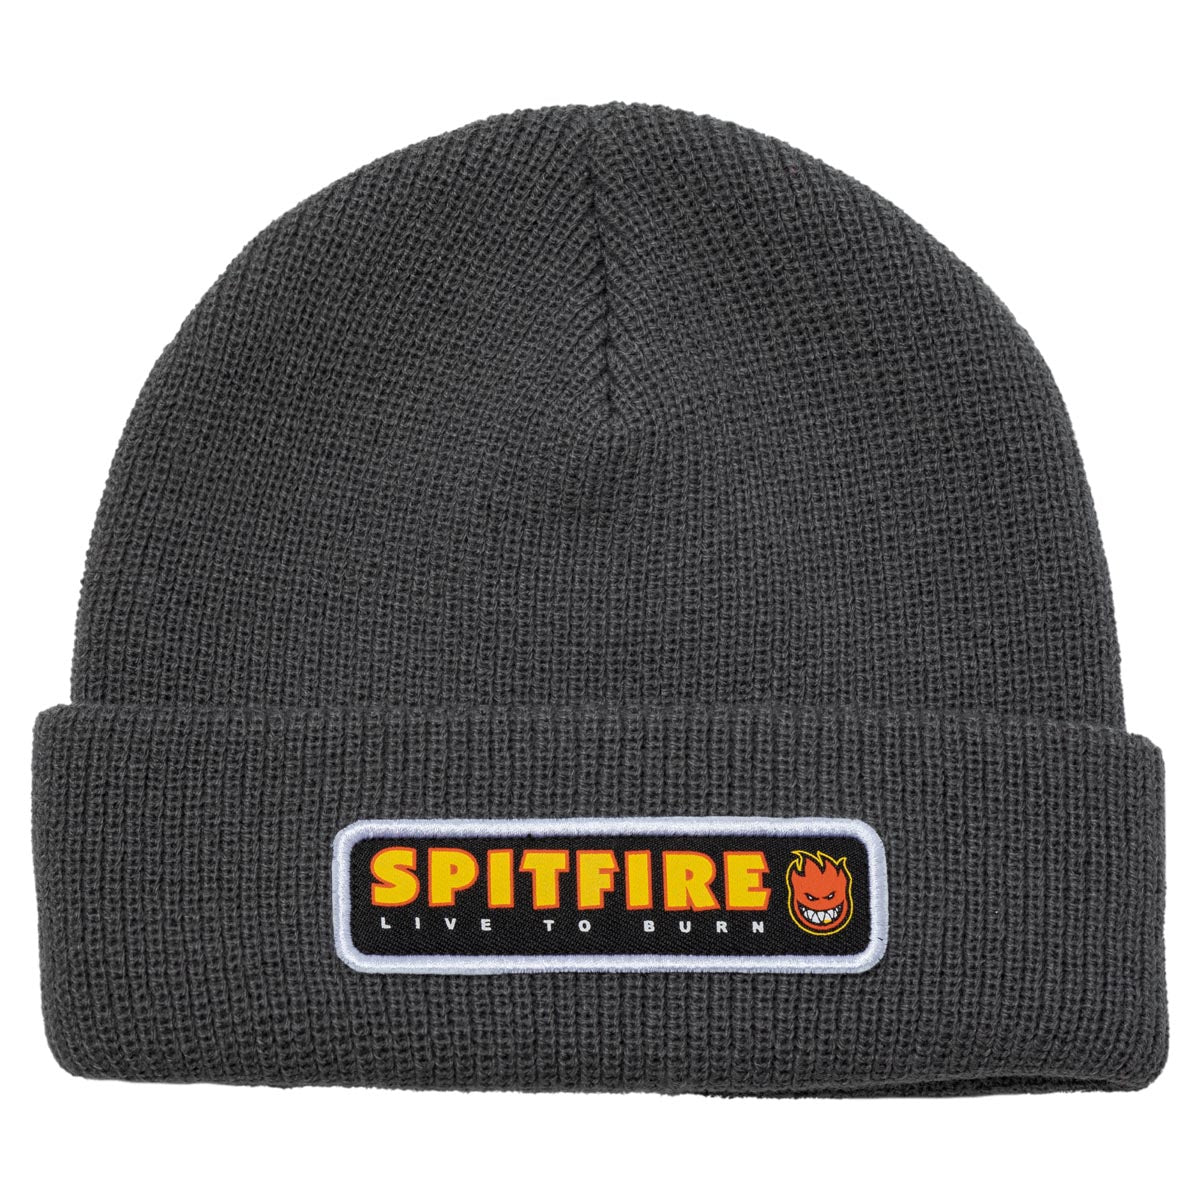 Spitfire Ltb Patch Beanie - Charcoal image 1